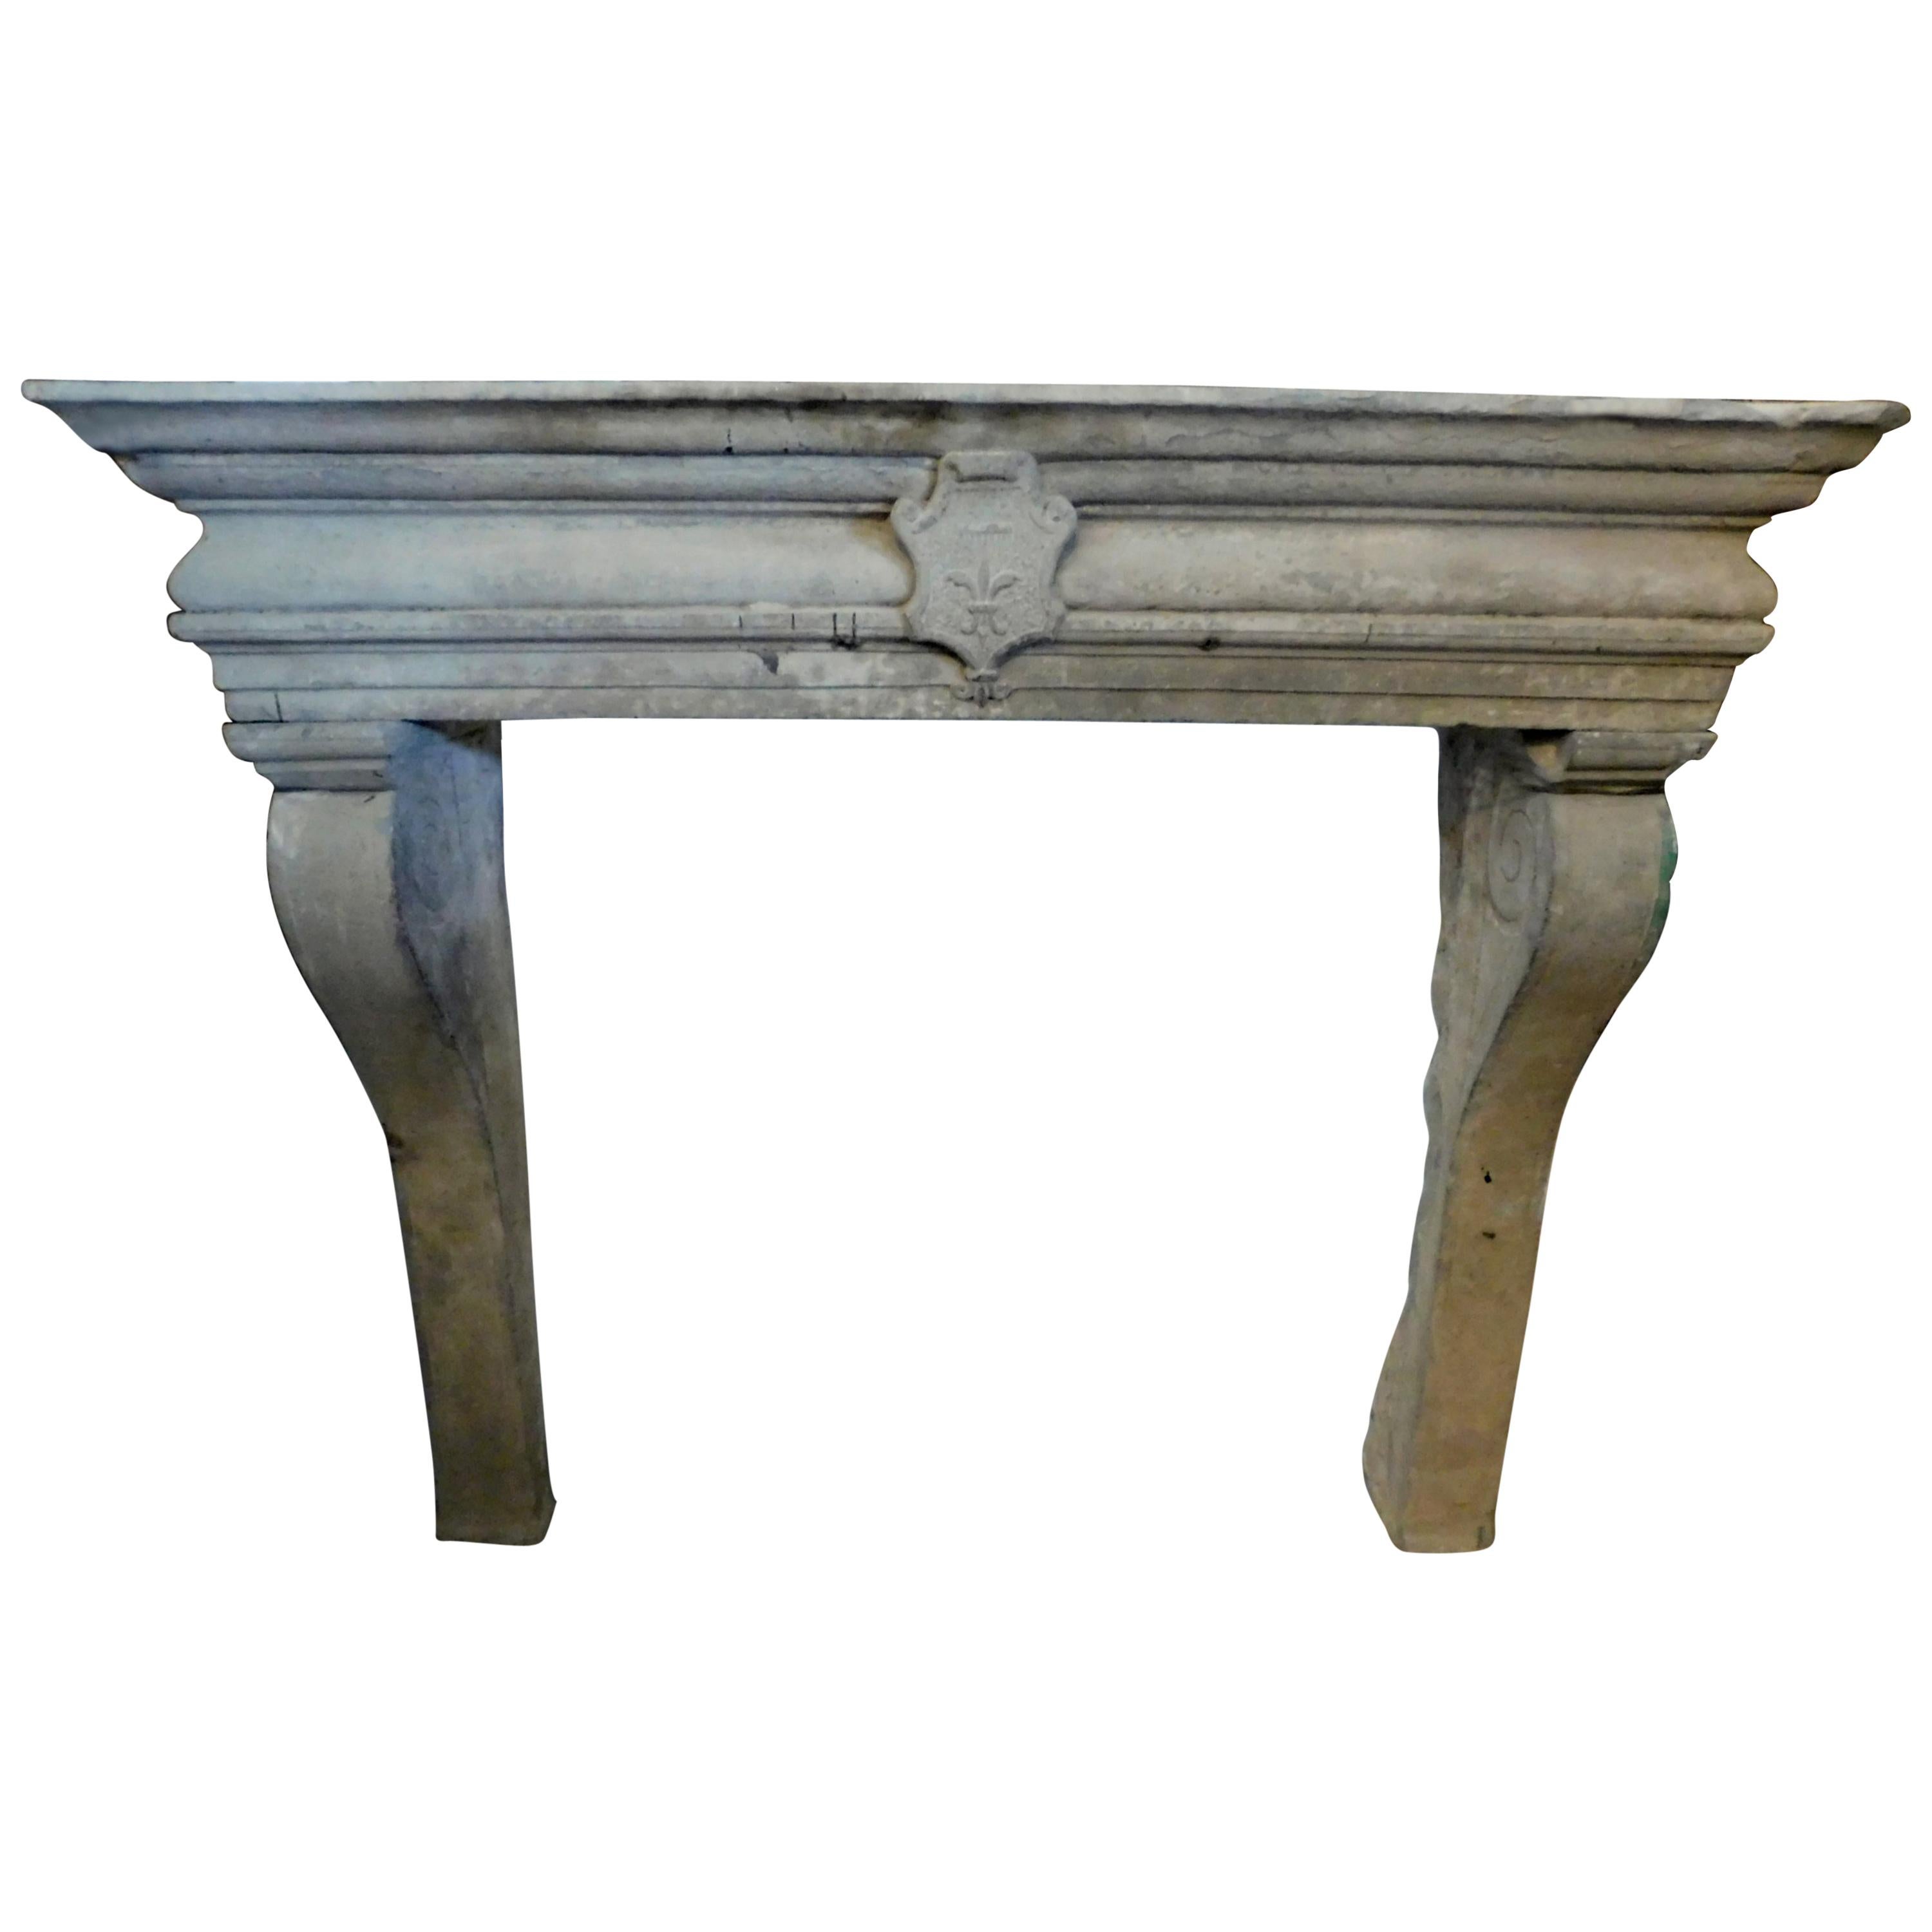 Antique fireplace mantel in grau Serena Stone, big monumental, '500 Italy